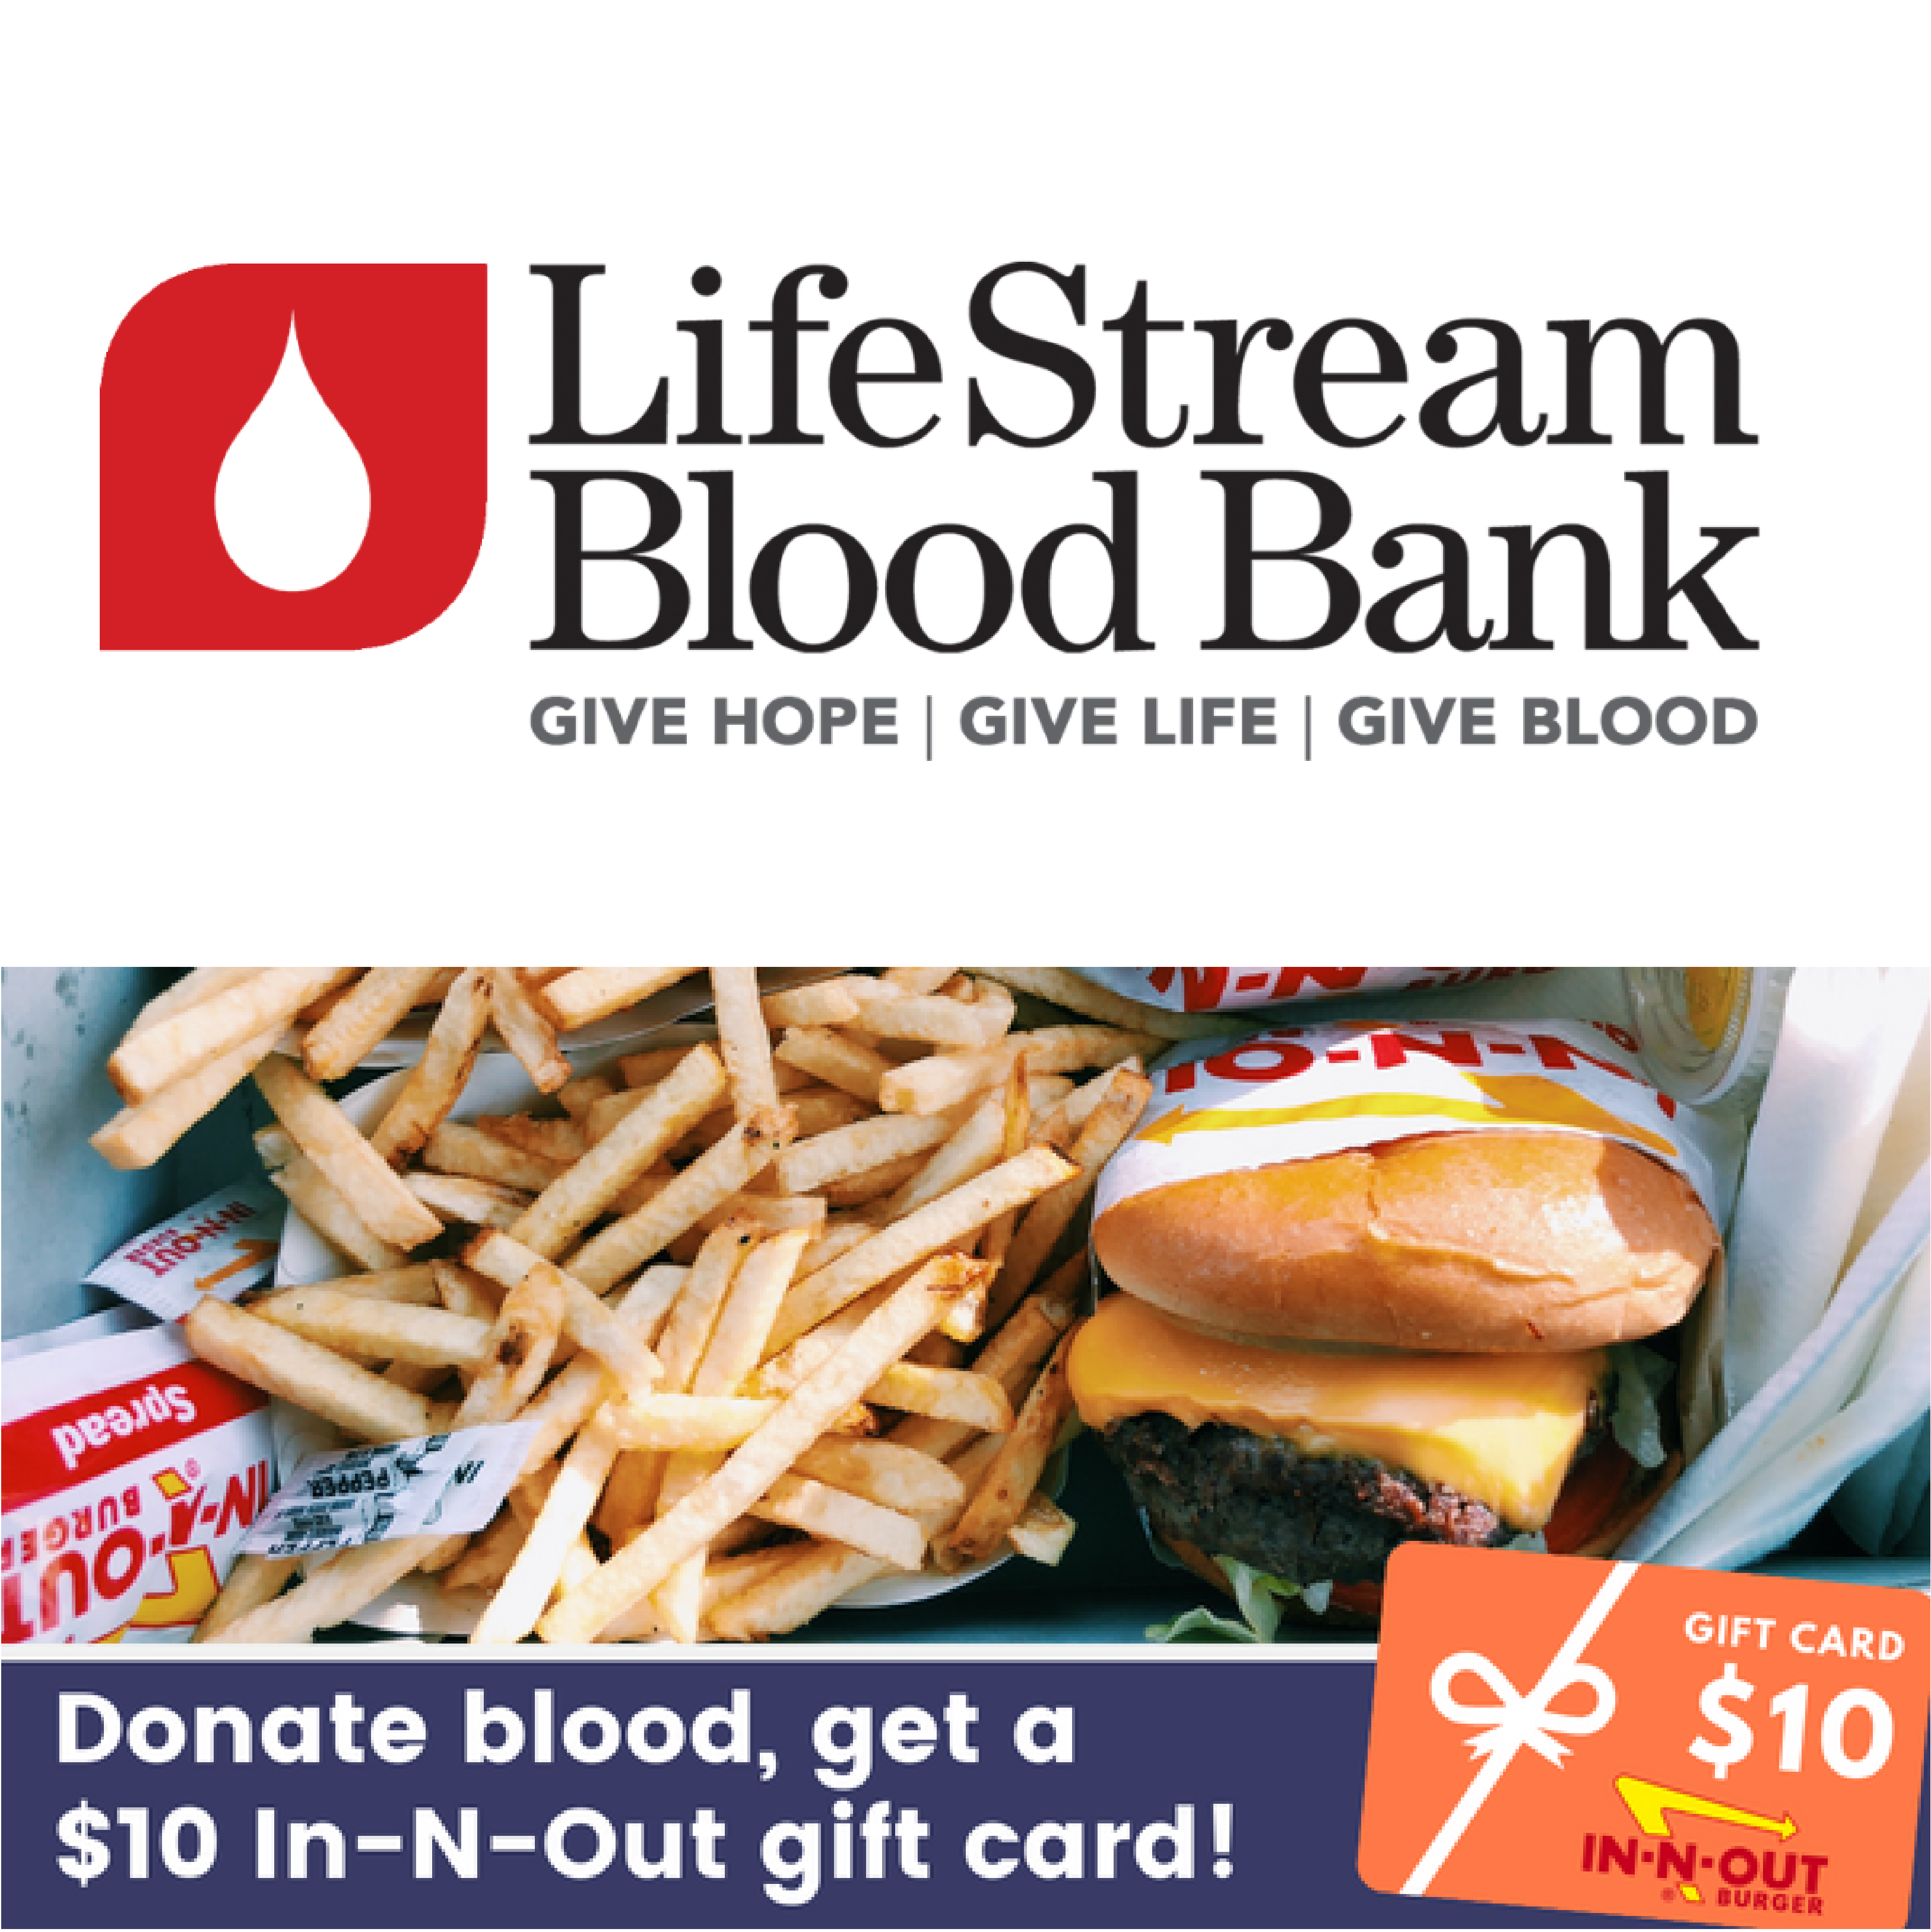 Blood Drive Indio Free In-N-Out Burger $10 Gift Card